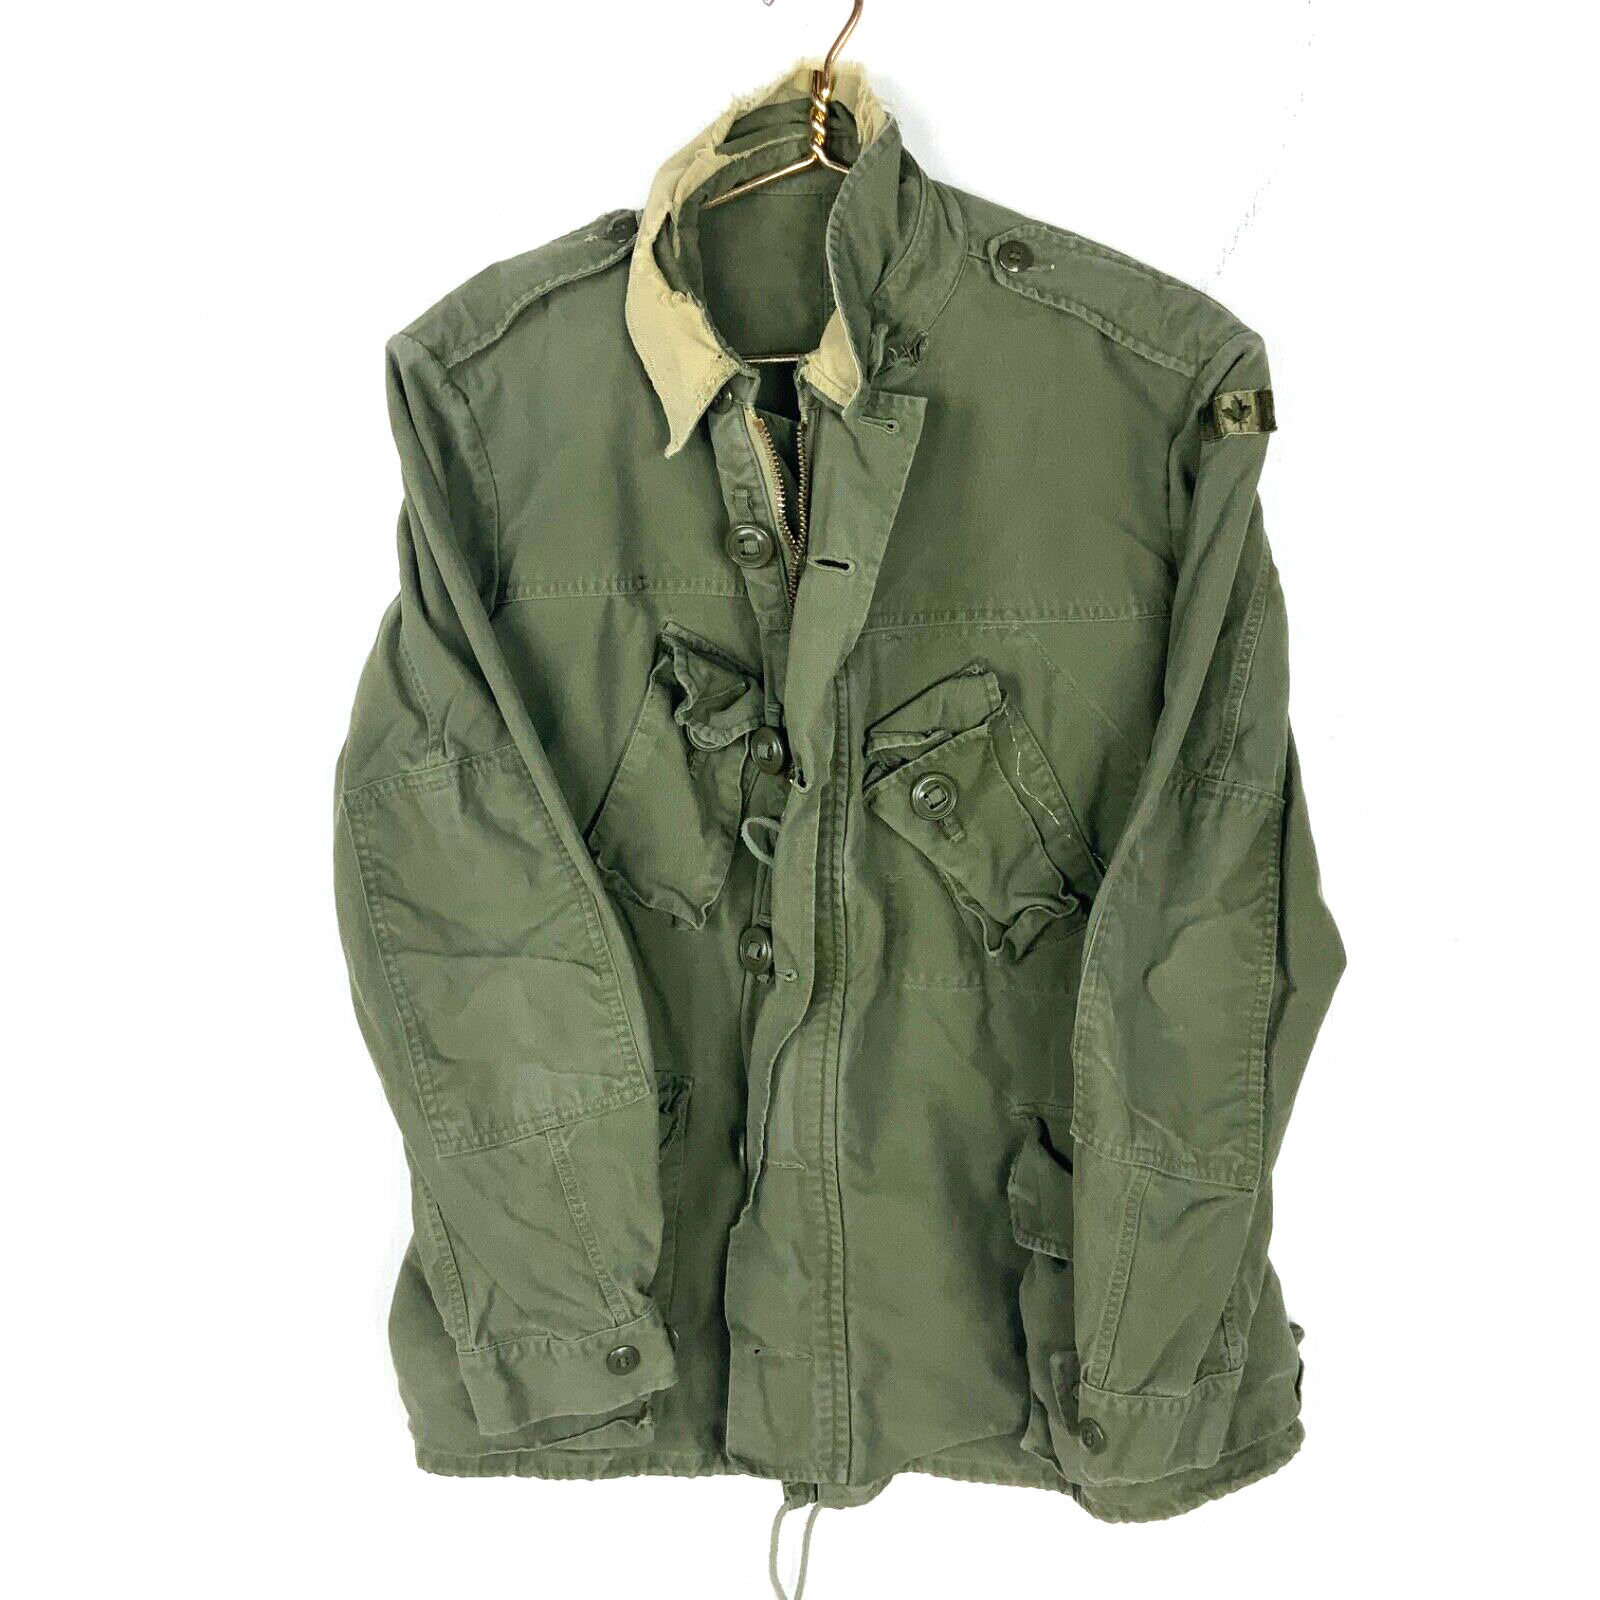 Vintage Canadian Military Army Jacket Size Large Green 60s 70s